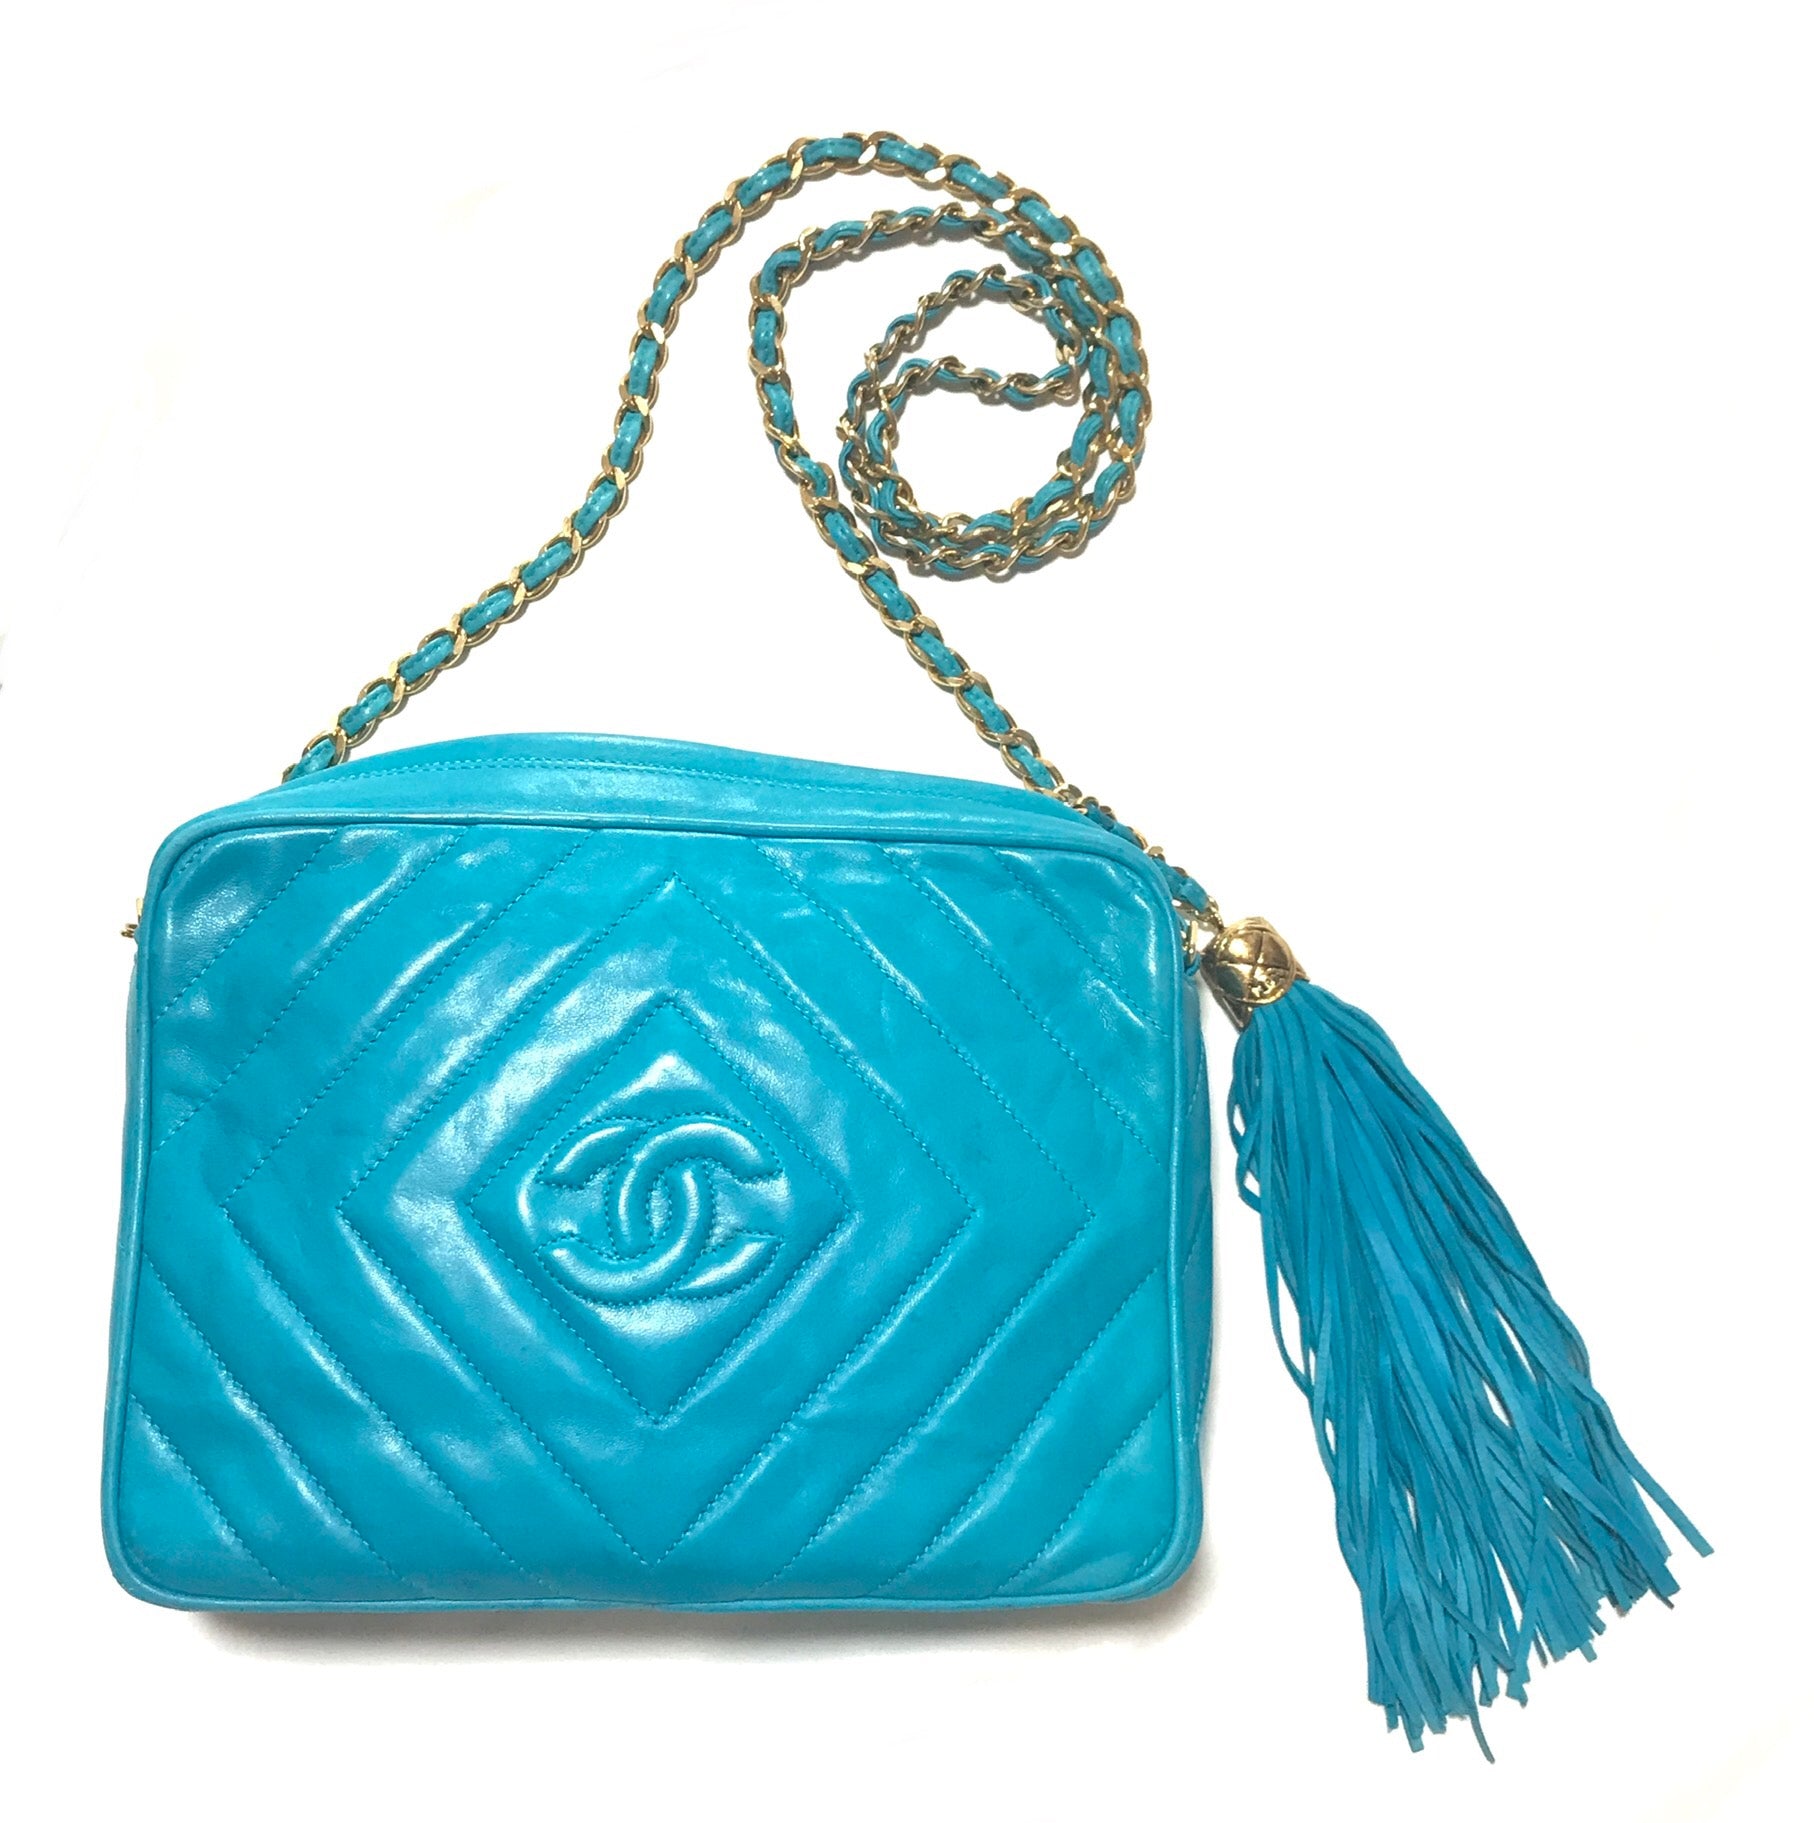 Chanel Blue Quilted Leather CC Crossbody Bag Chanel